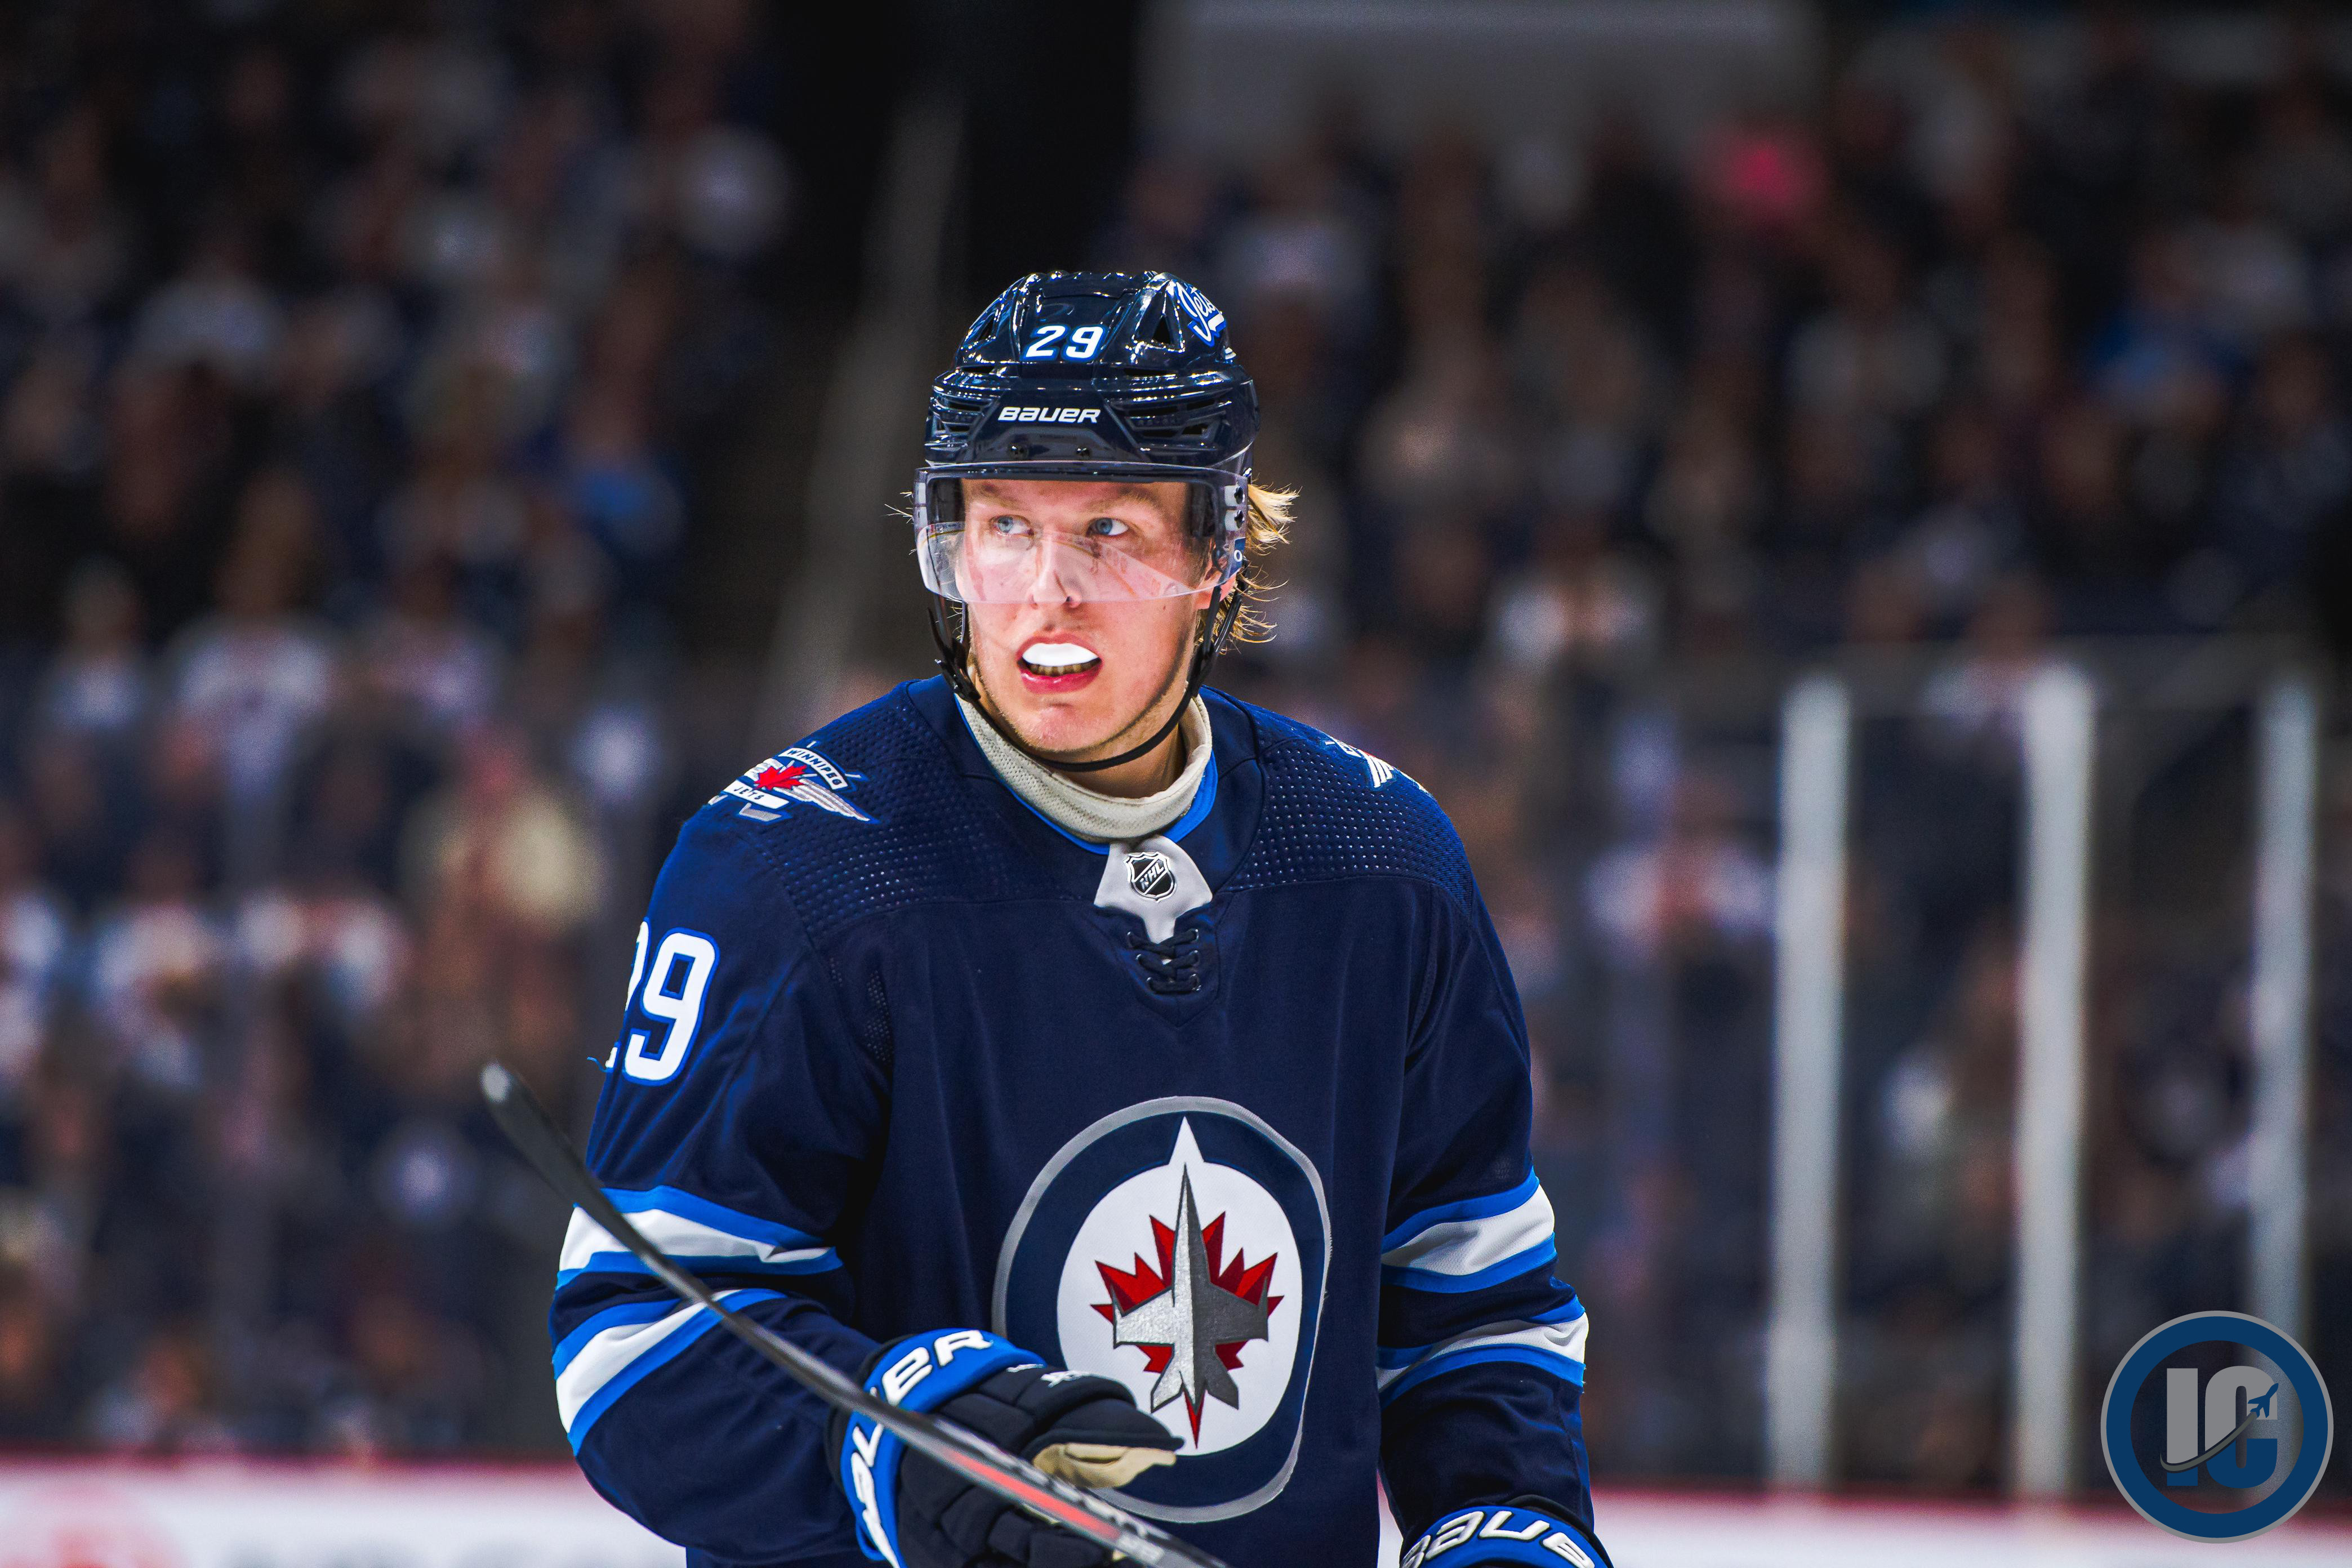 Patrik Laine returns to Winnipeg to face Jets for first time since